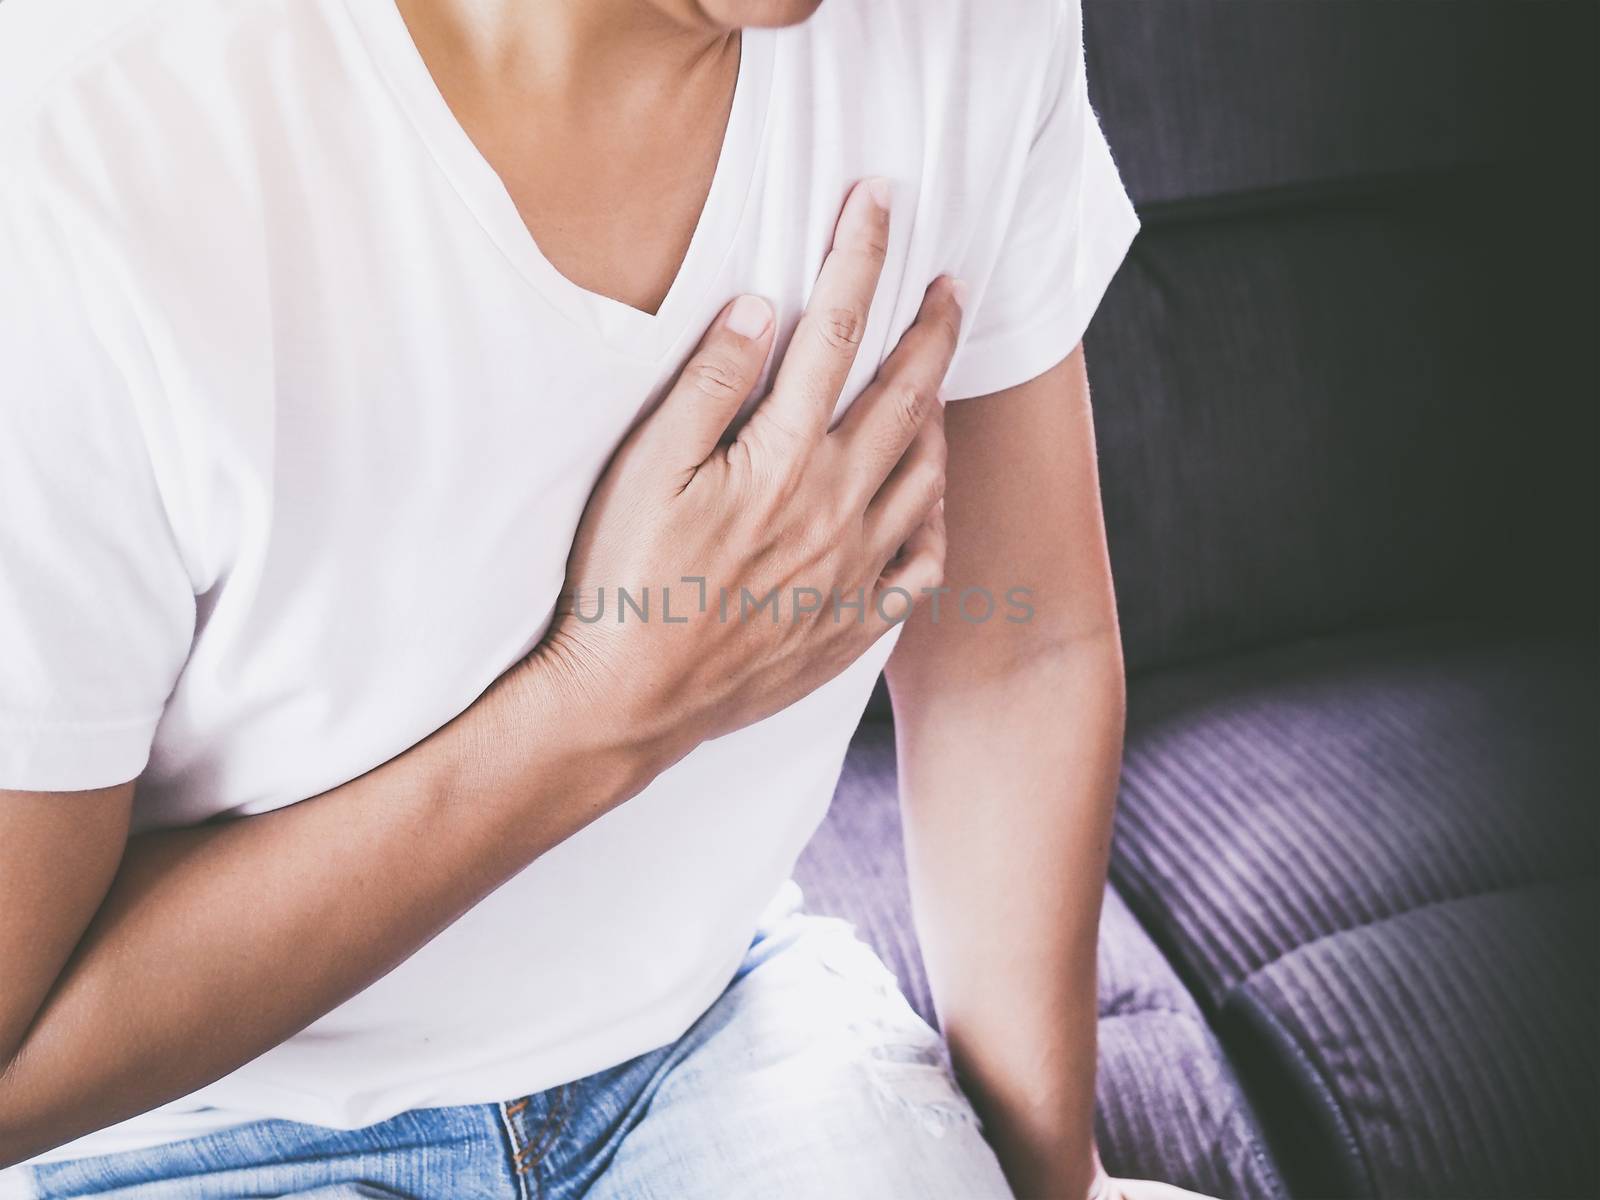 Symptoms of chest pain due to myocardial infarction, Heart attack by kittima05